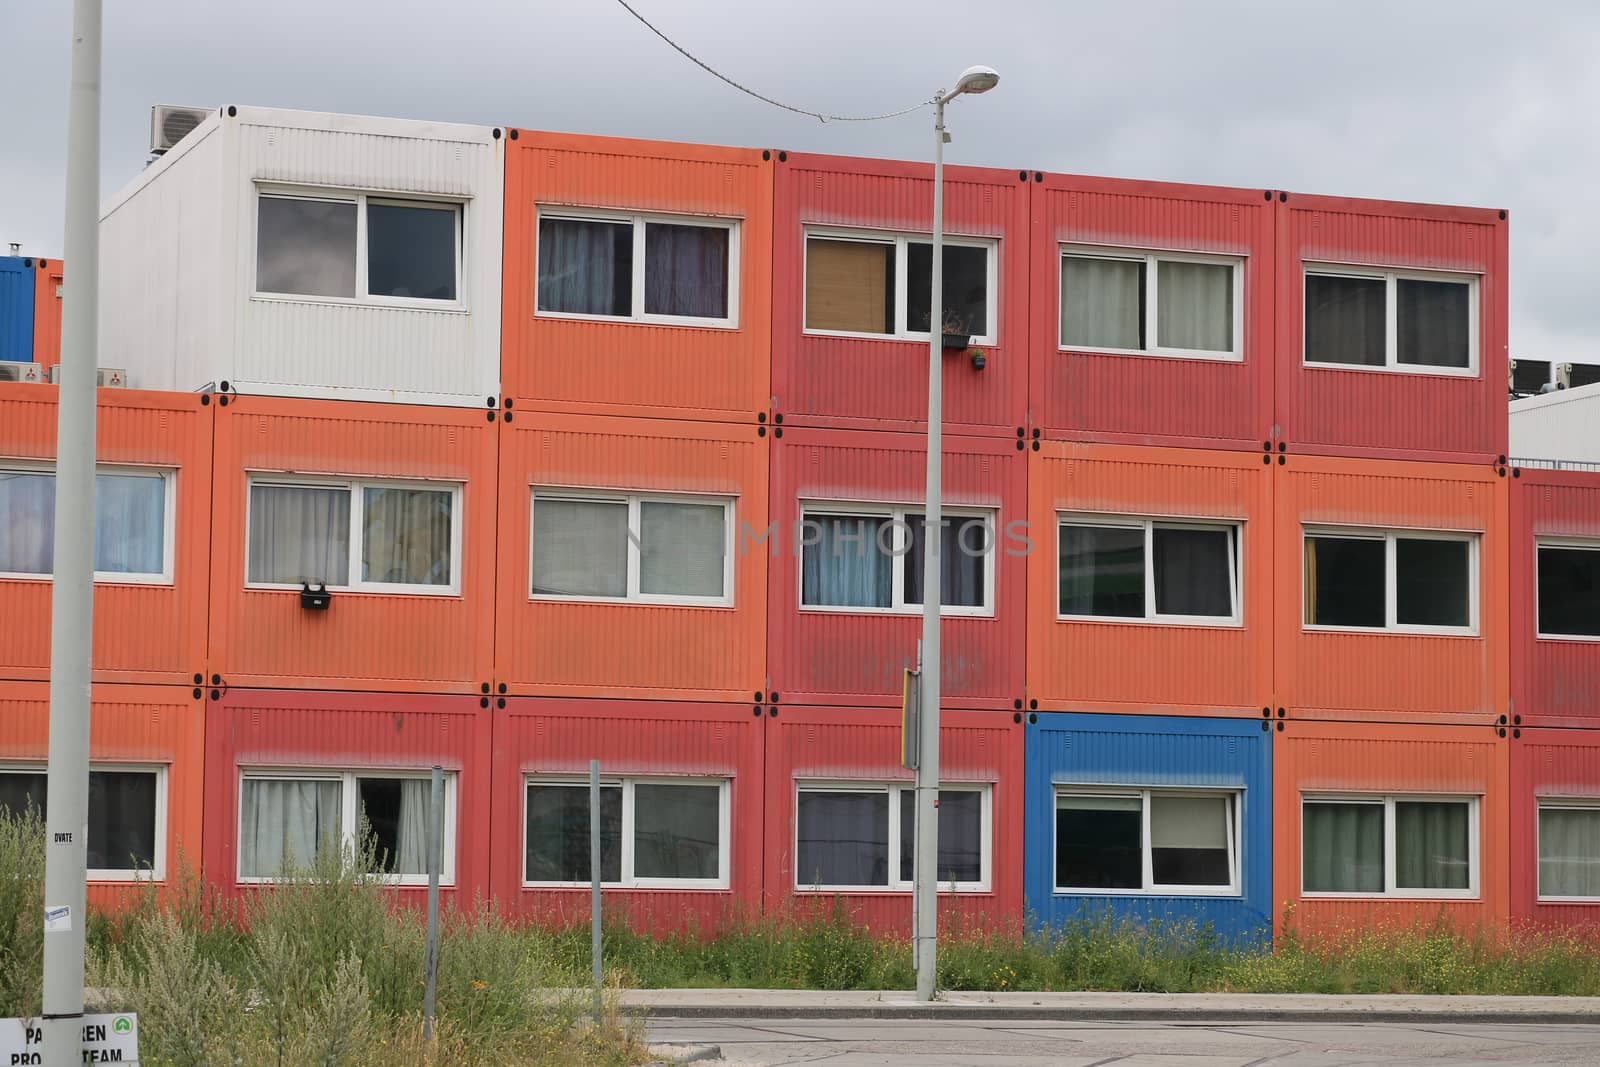 Amsterdam, NDSM, Netherlands. About the July 2019. Temporary housing in steel containers. Overlapping containers with small construction site apartments.